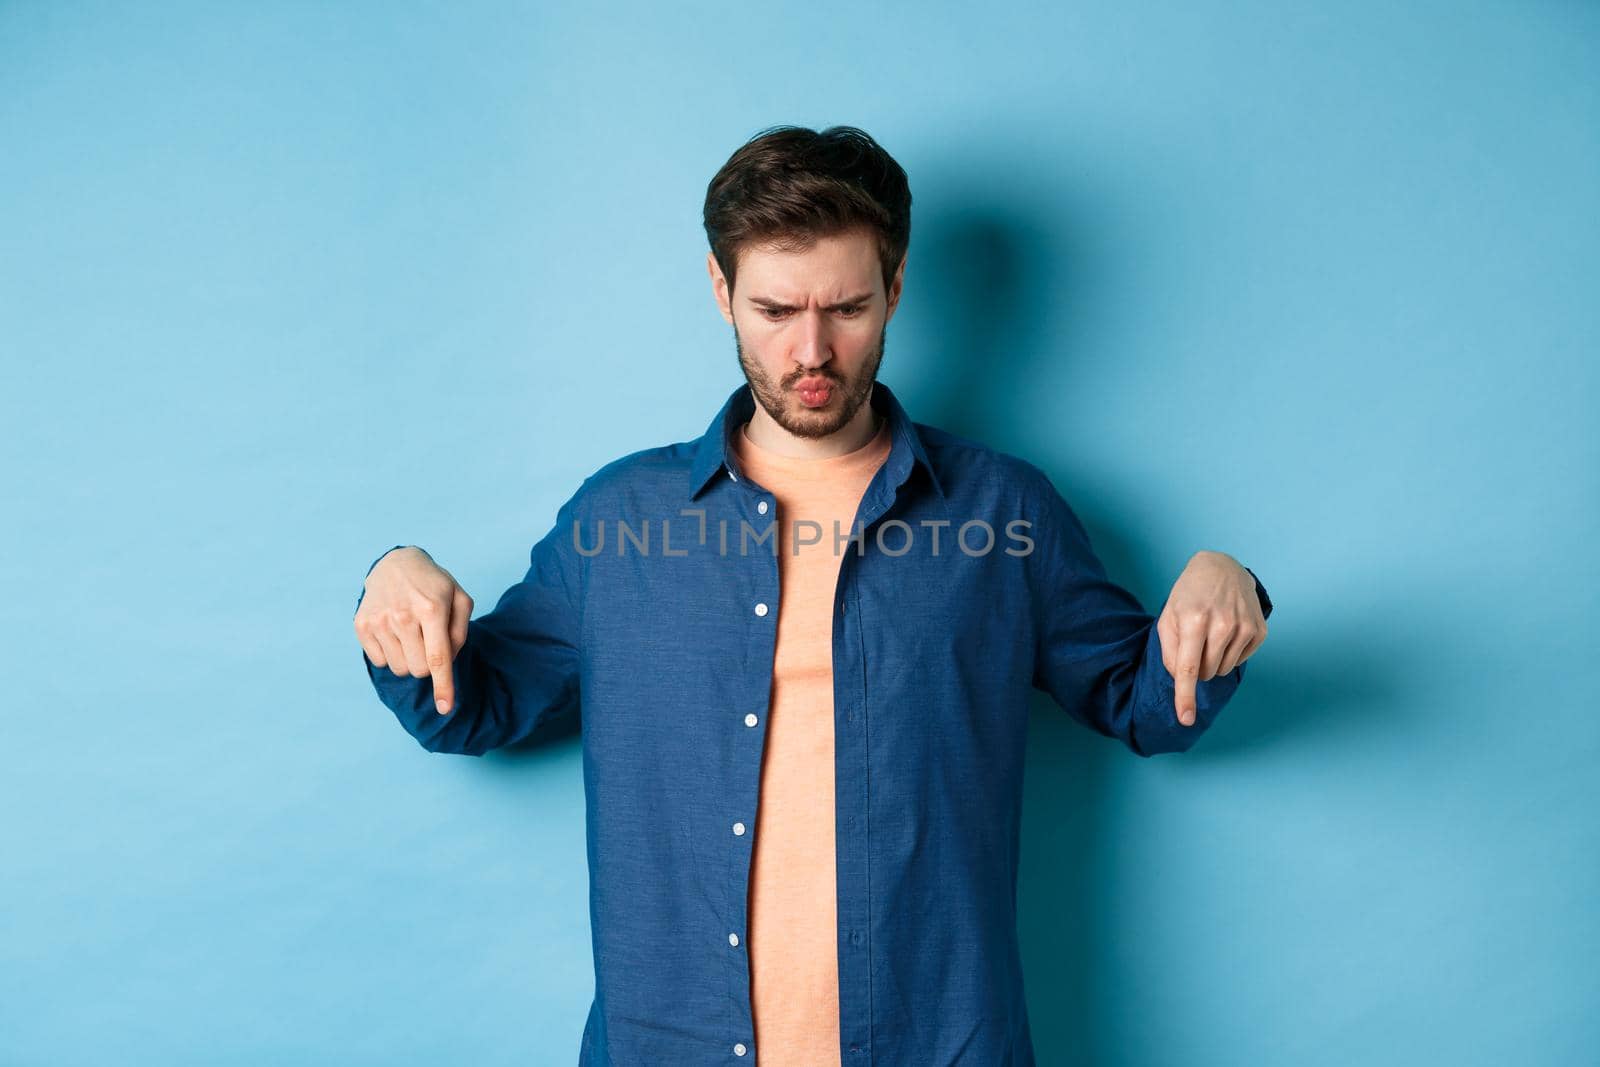 Confused and shocked guy looking and pointing down at something strange, standing on blue background. Copy space